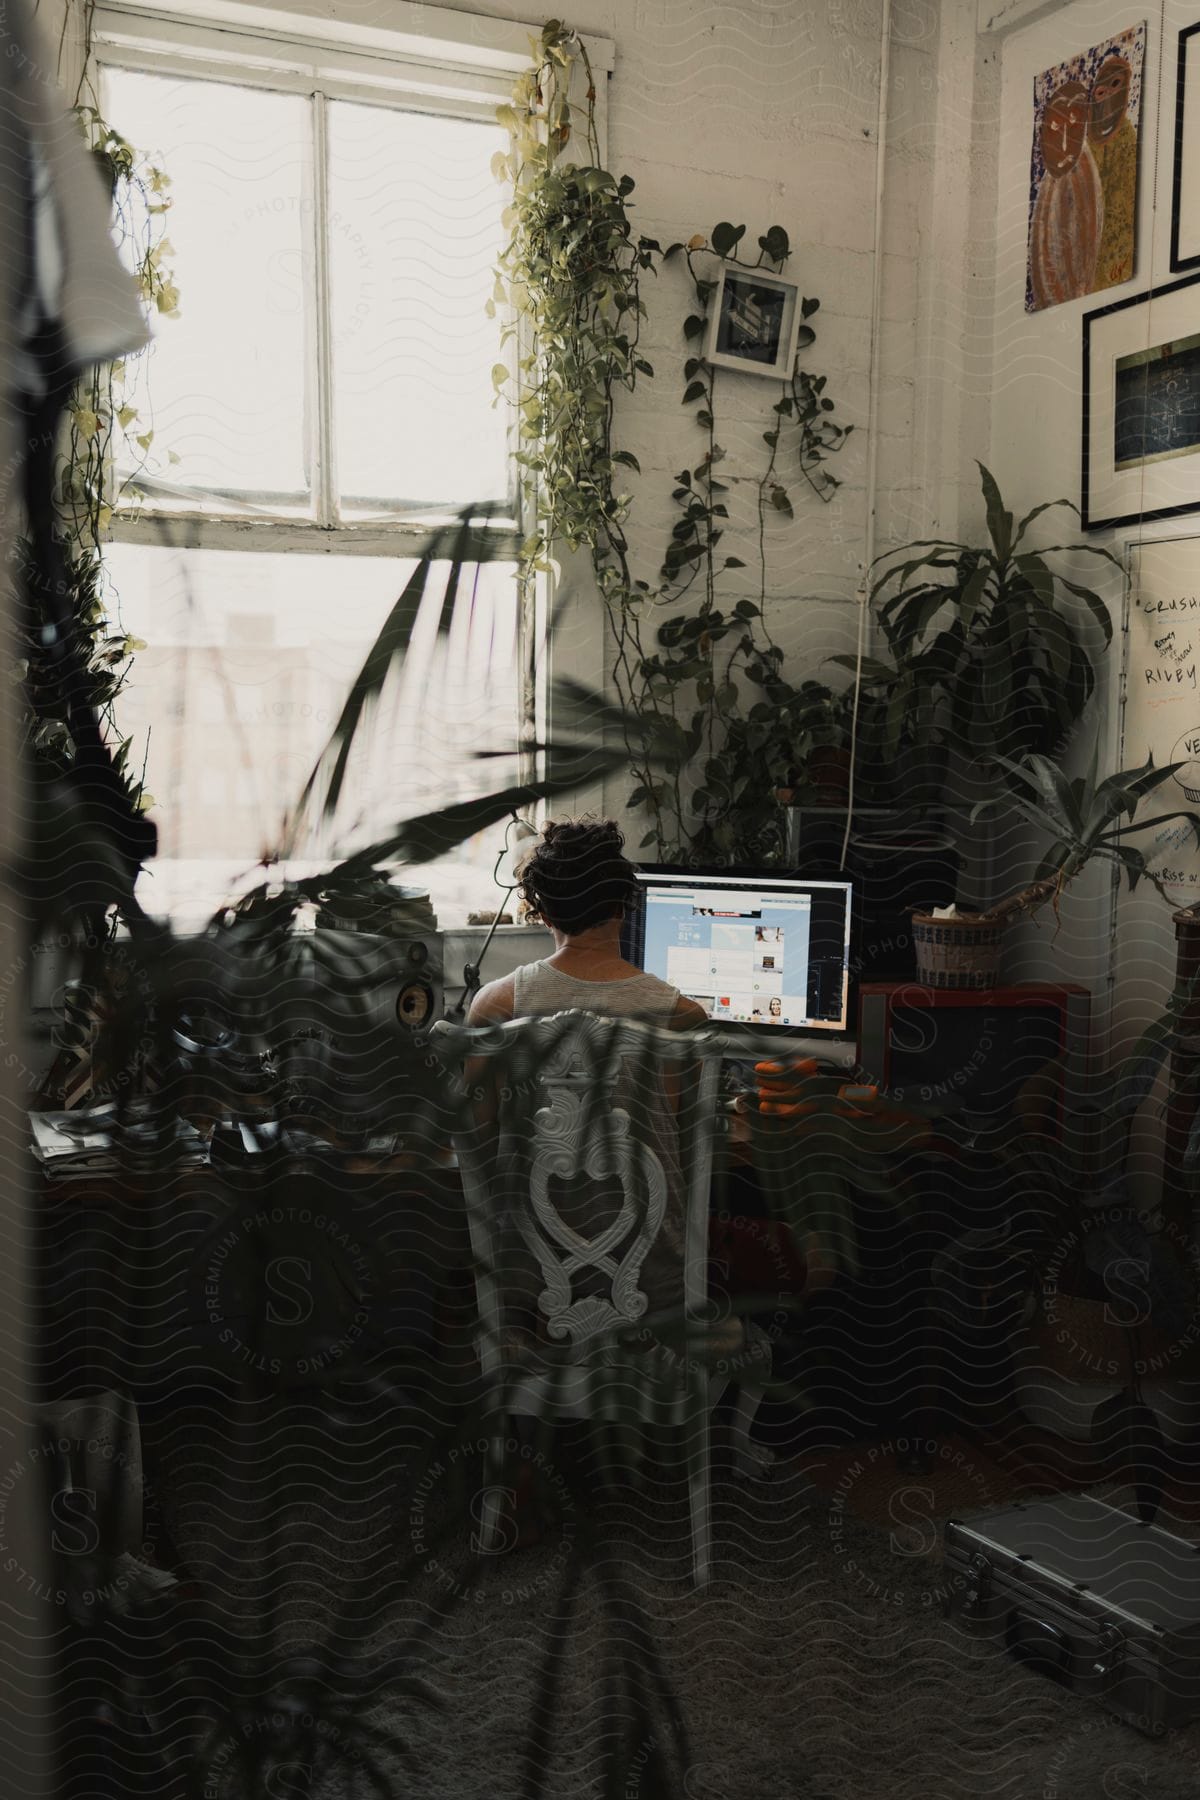 Stock photo of back view of a person sitting at a table near a window with a computer and potted plants with vines climbing the wall